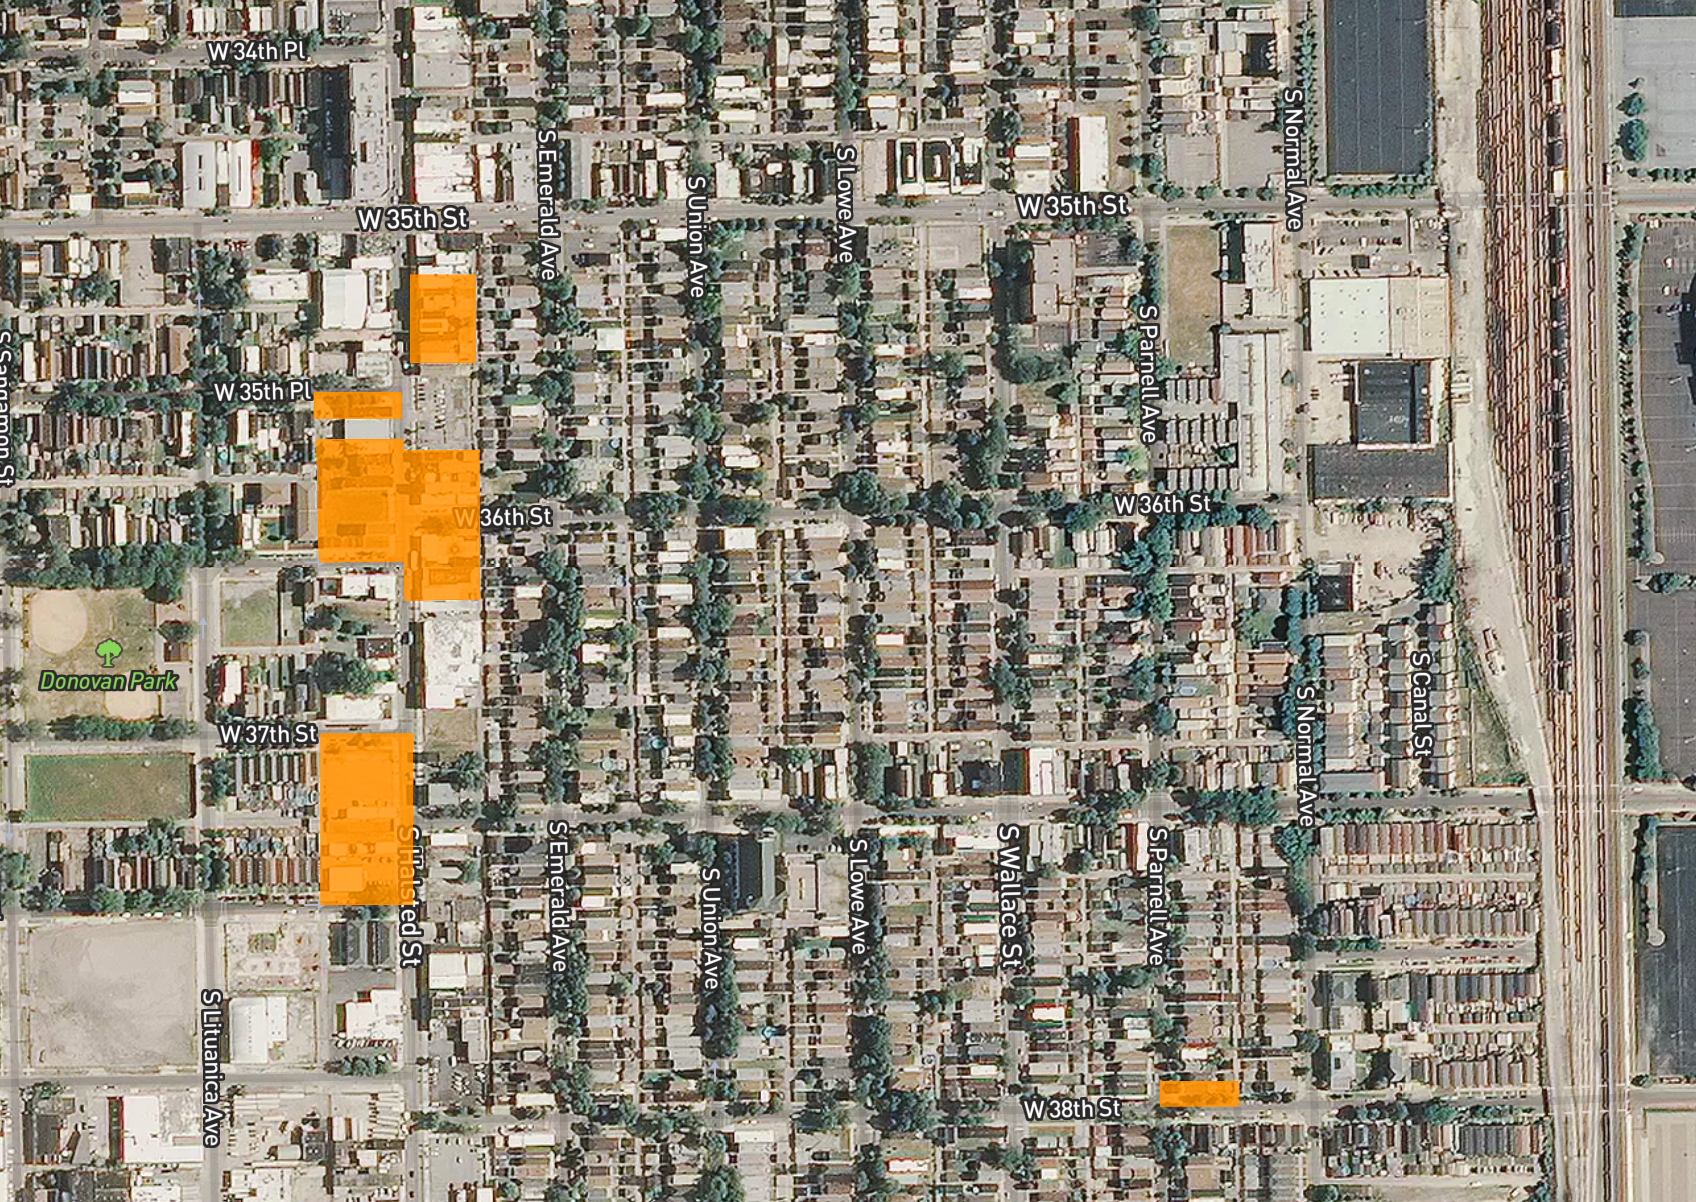 These highlighted properties would have their zoning changed from mixed-use commercial to residential, if Alderman Thompson’s ordinances are passed by City Council. Three salons are located in the northernmost parcel, while the other parcels include vacant storefronts, a manufacturing business, vacant lots, and a stray multifamily residential unit to the west, at 3759 S. Parnell. (Data interpreted from the proposed ordinances by Chicago Cityscape; map by Jasmine Mithani)